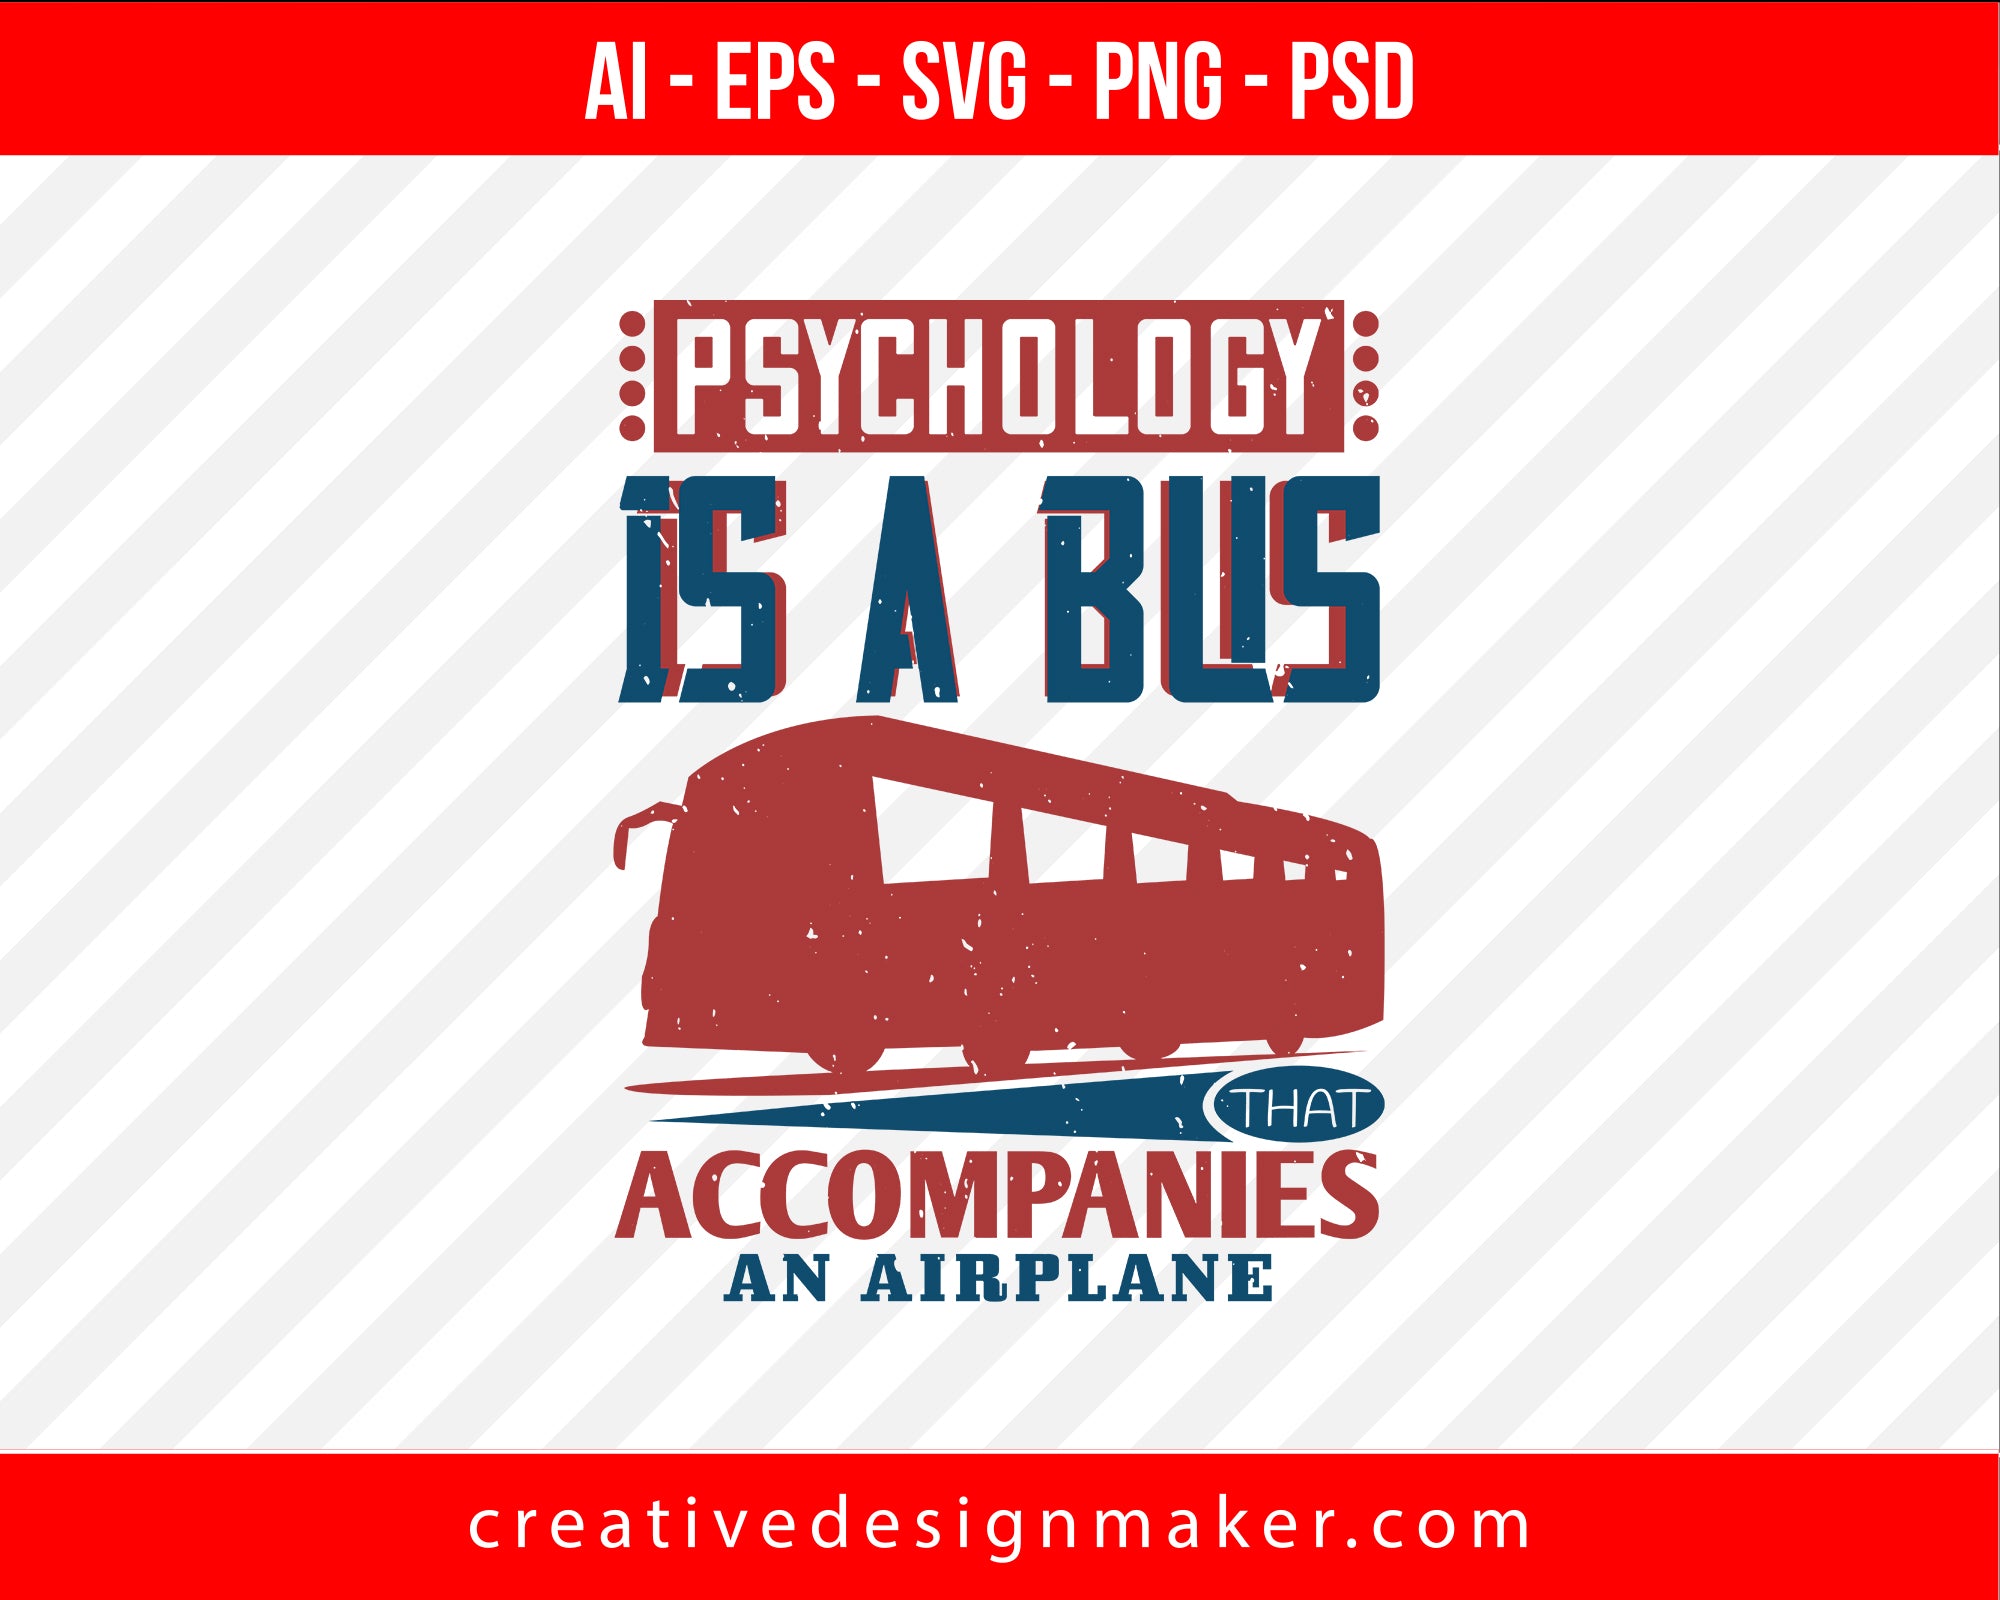 Psychology is a bus that accompanies an airplane Vehicles Print Ready Editable T-Shirt SVG Design!